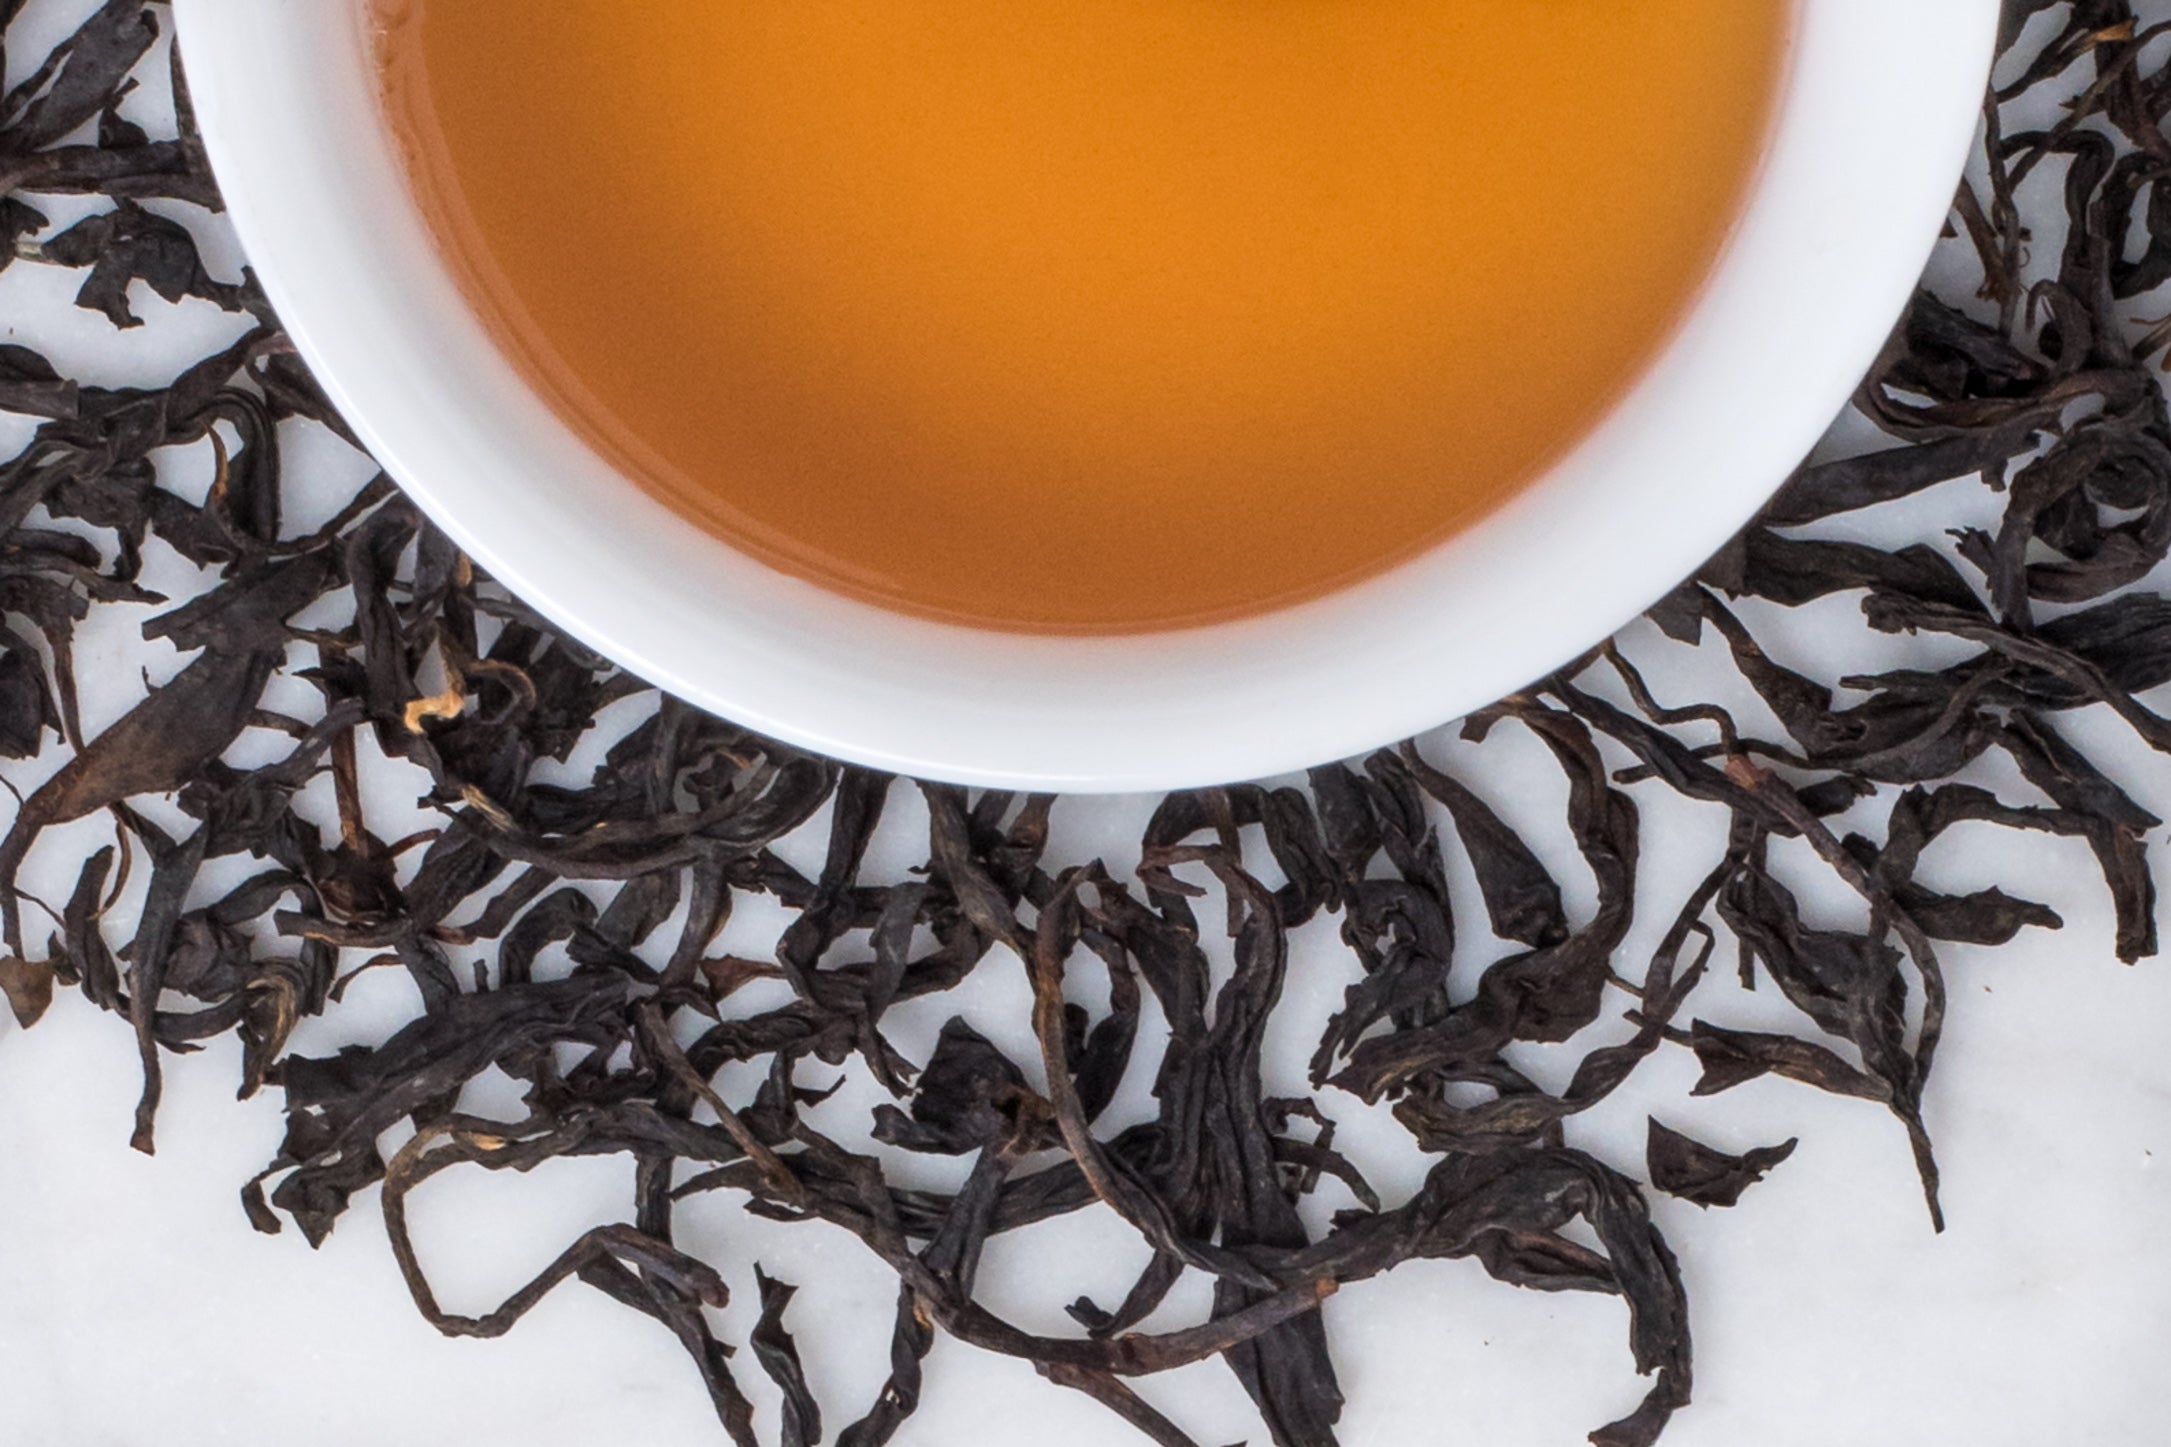 twisted leaf honey aroma mi xiang hong cha black tea leaves surrounding a white cup with brewed black tea